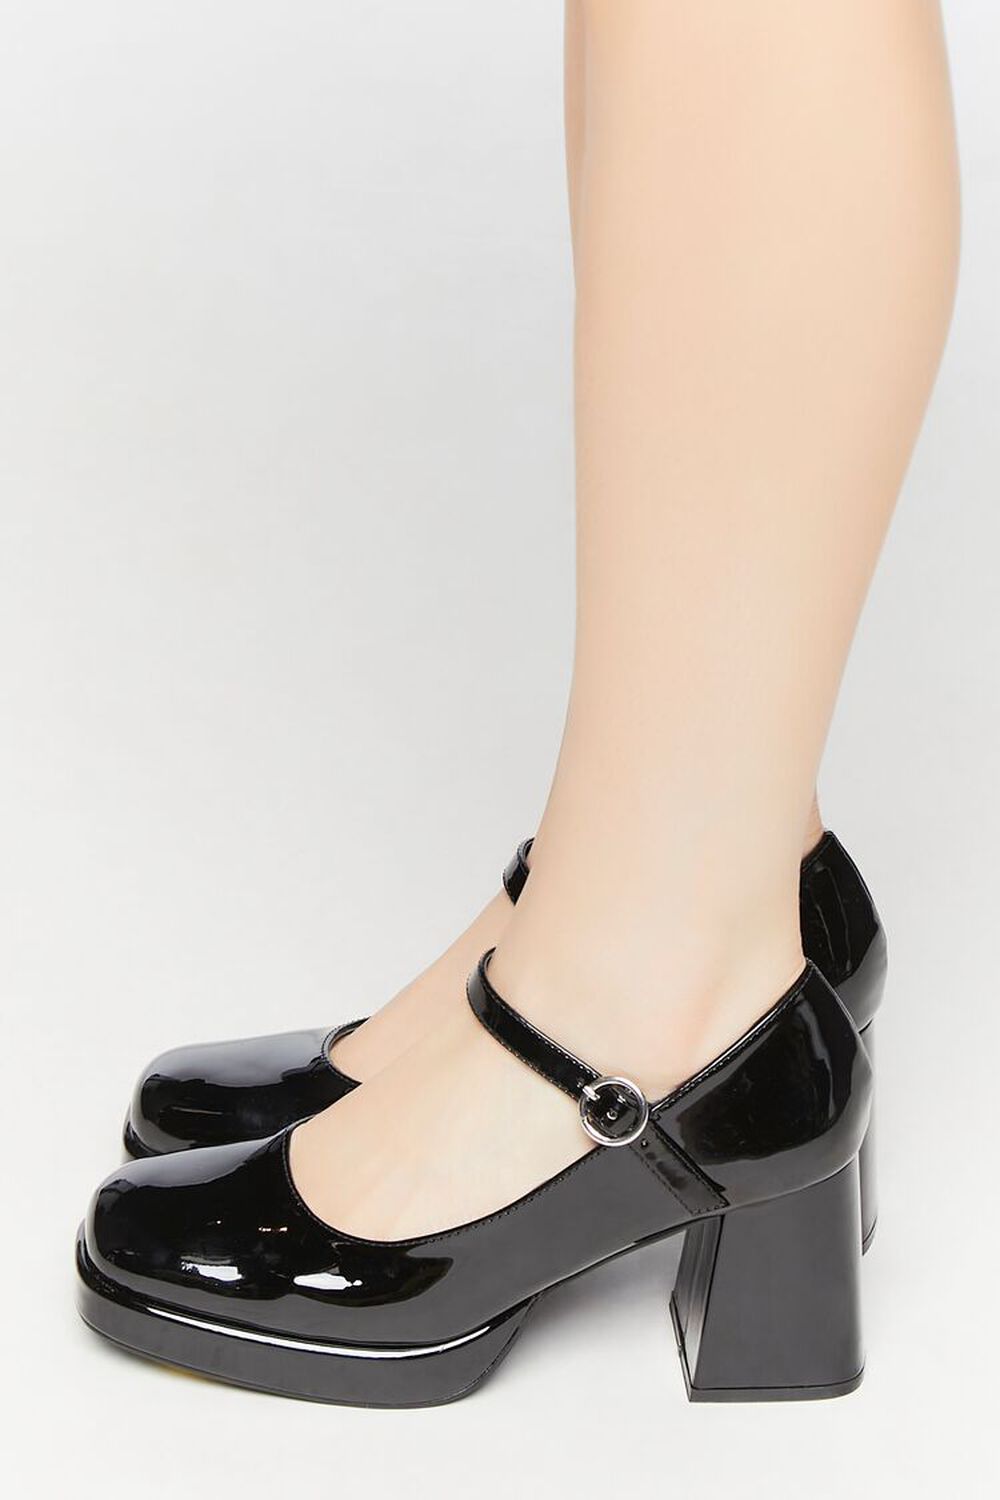 BLACK Faux Patent Leather Mary Jane Heels, image 2